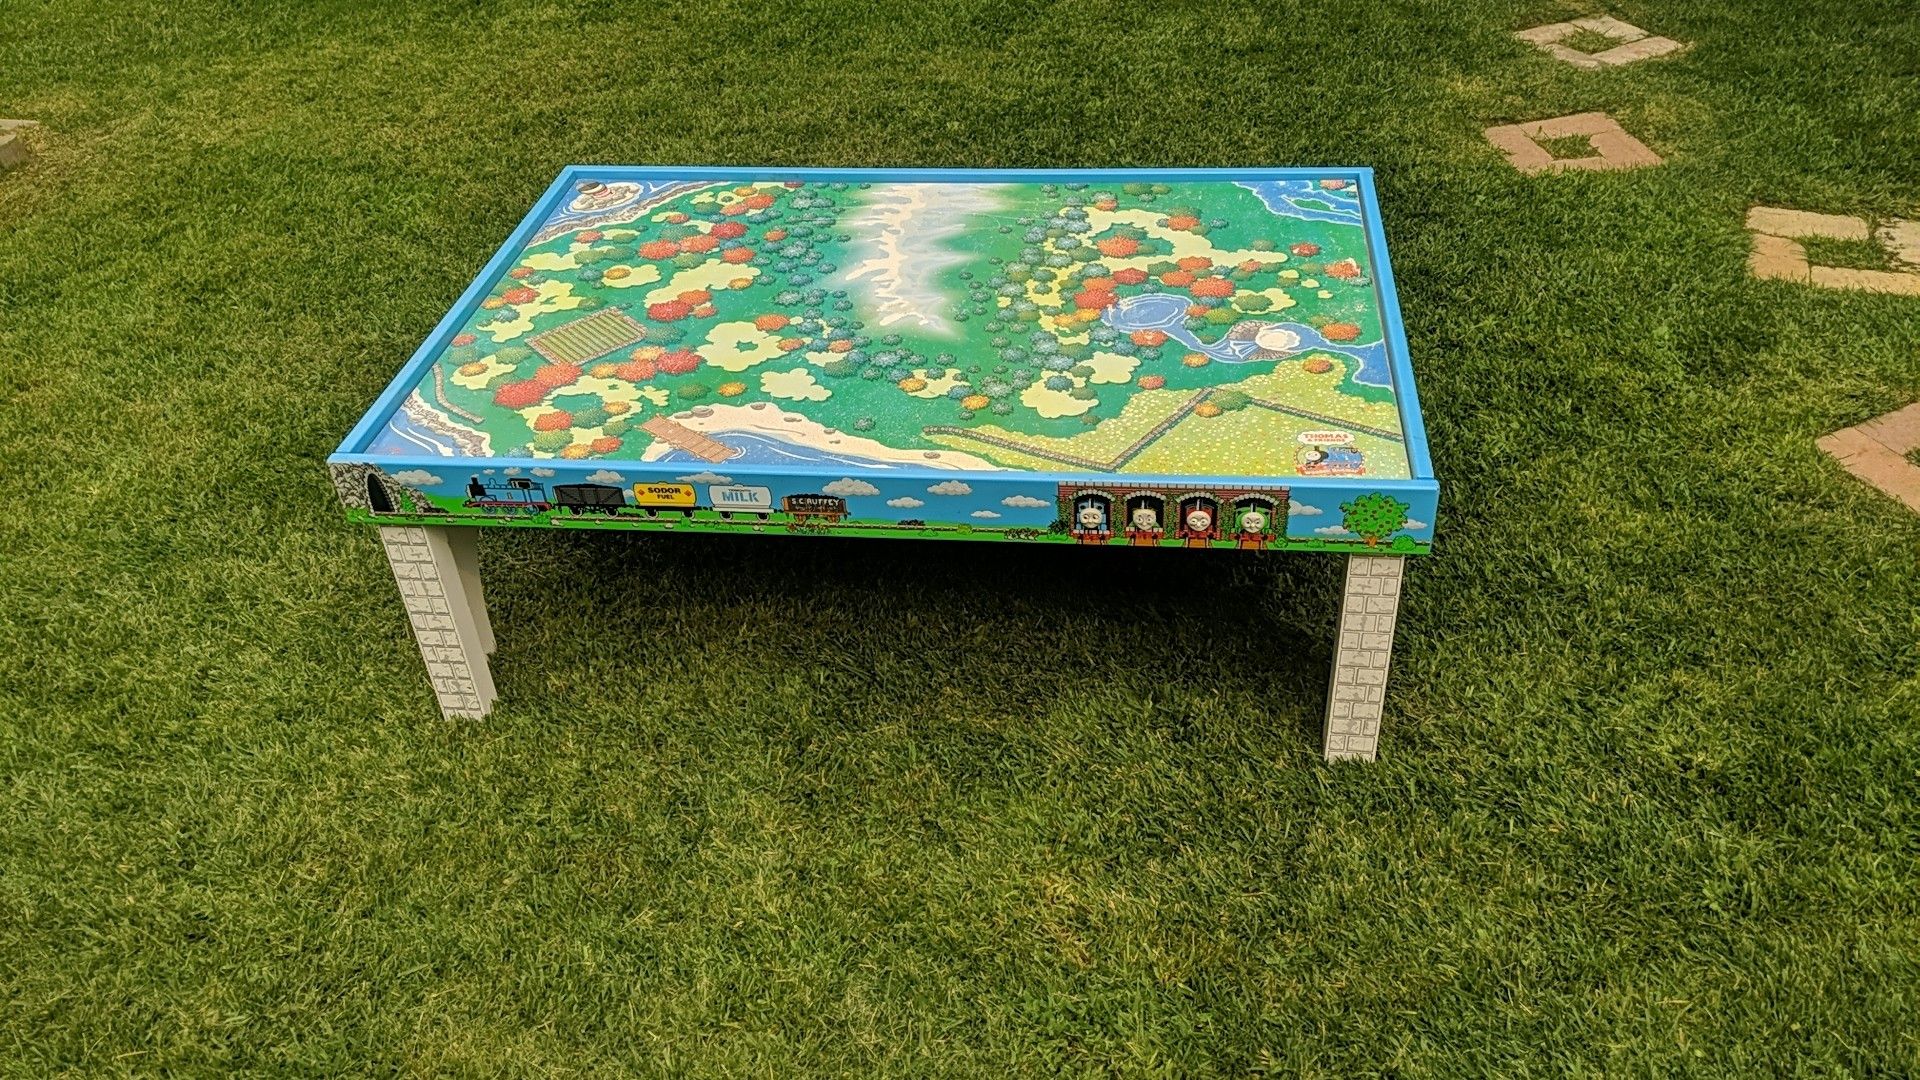 Thomas the Tank Engine and Friends Play Table